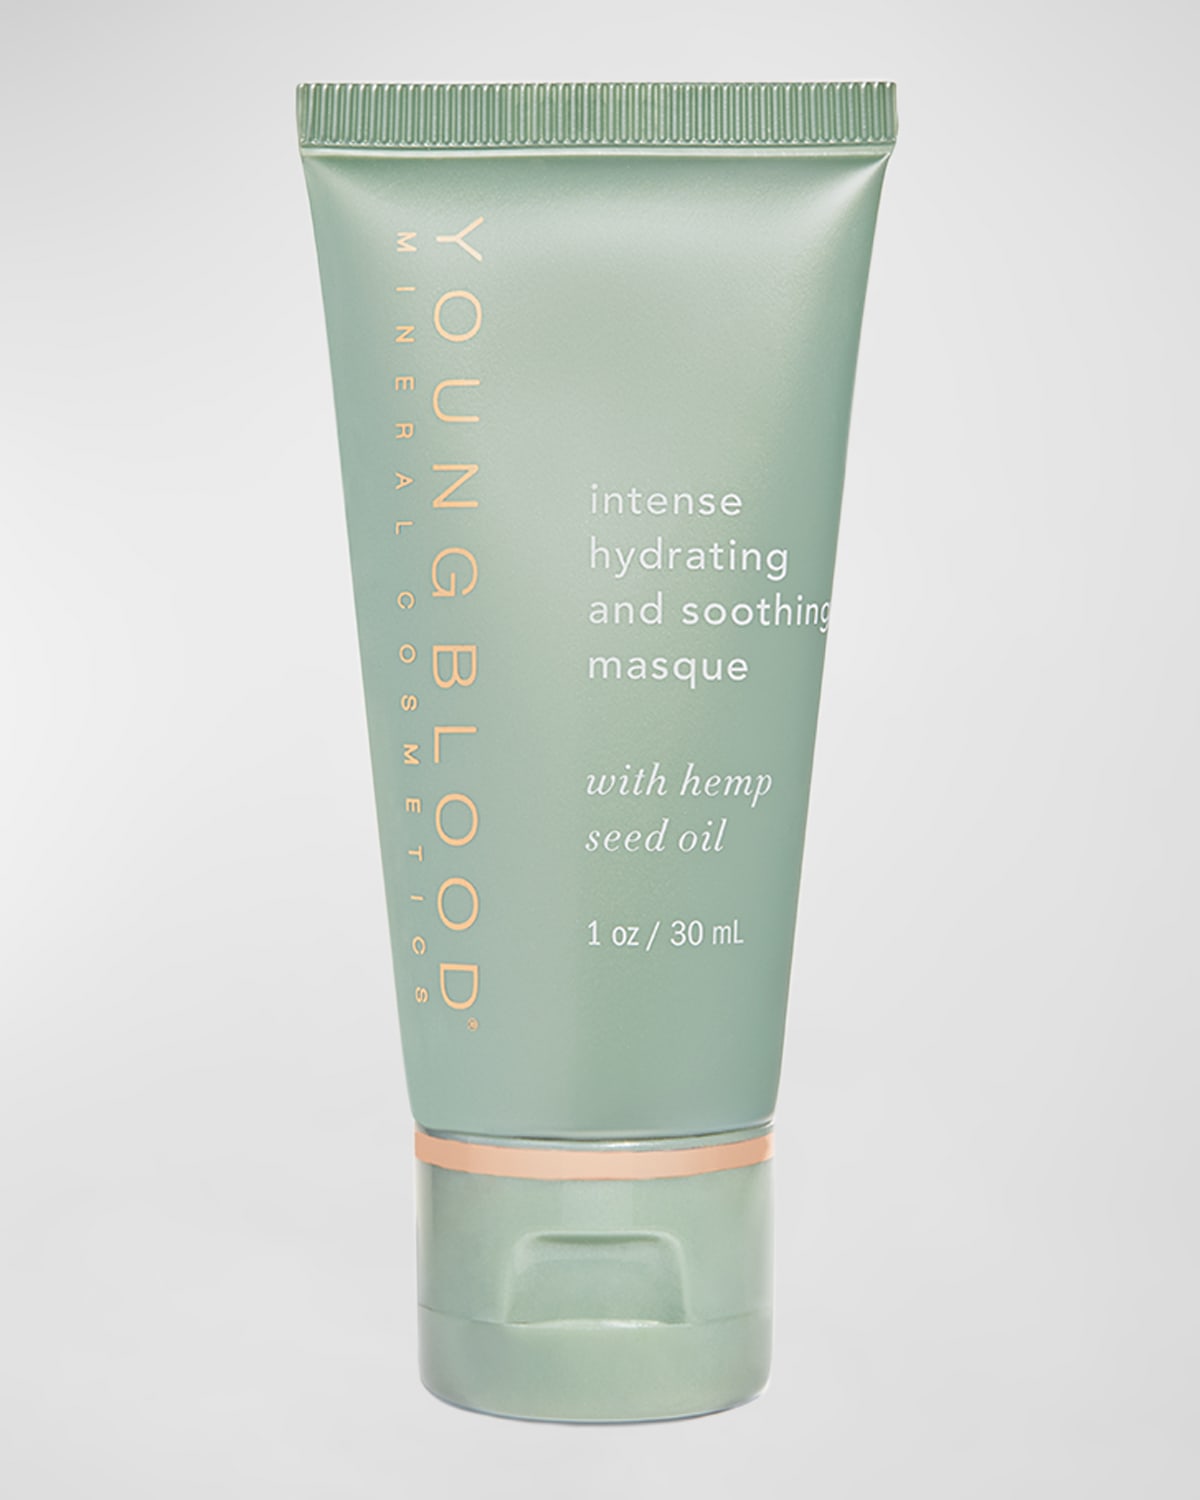 Intense Hydrating and Soothing Masque, 1 oz.